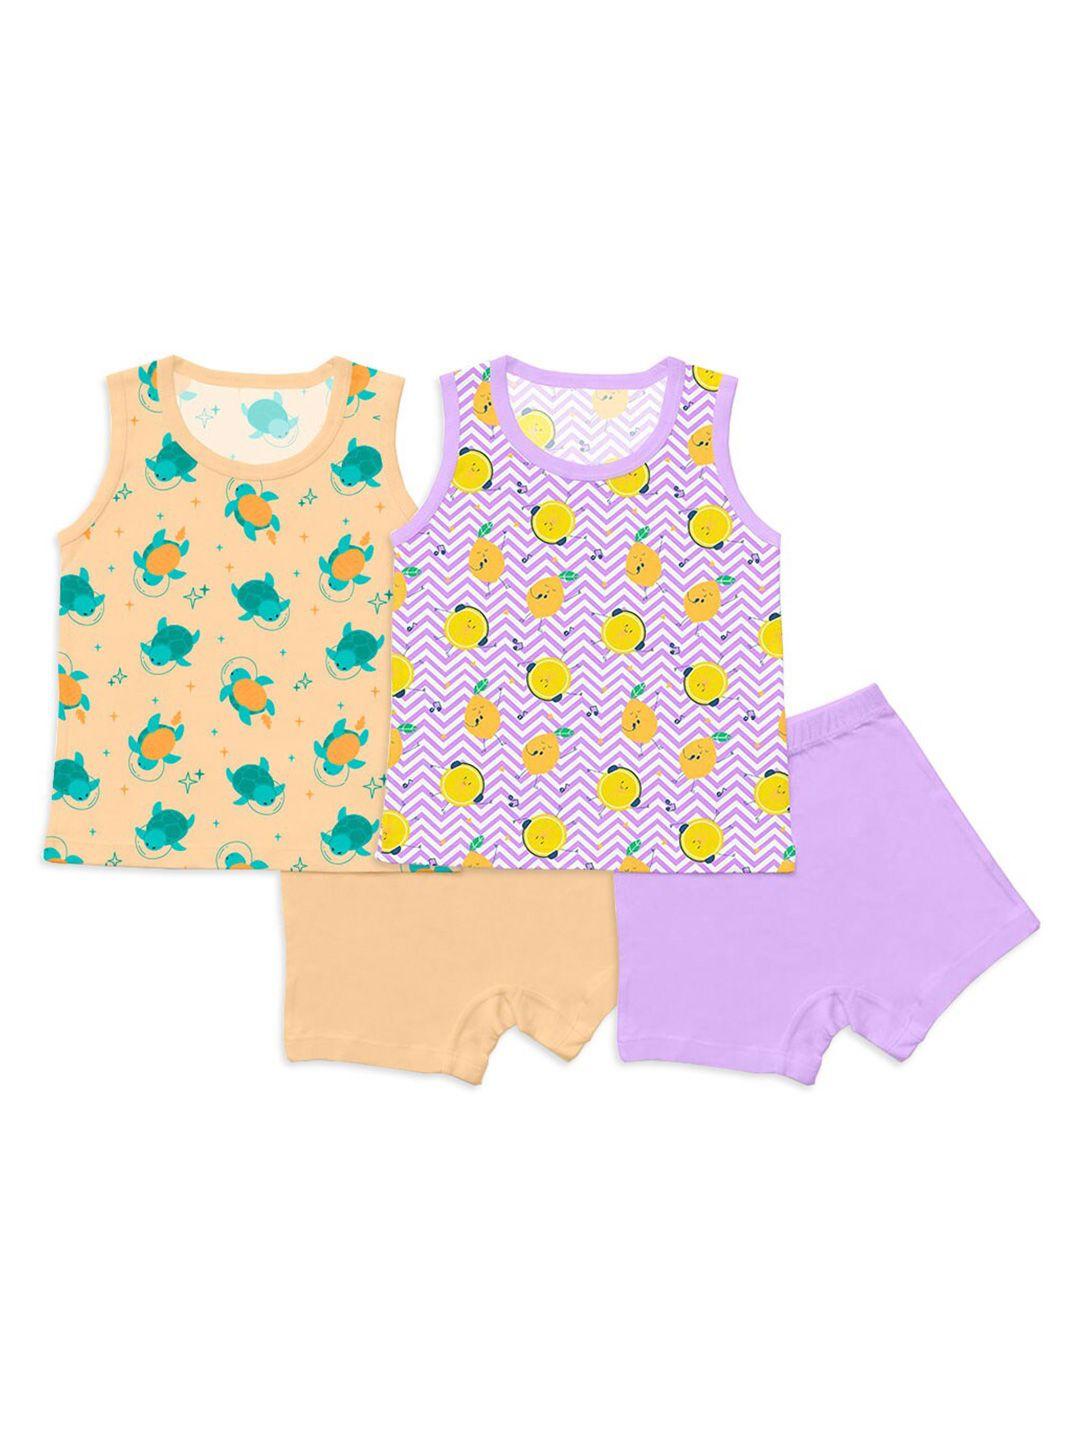 superbottoms-unisex-kids-lavender-&-peach-coloured-printed-set-of-2-sustainable-co-ord-set